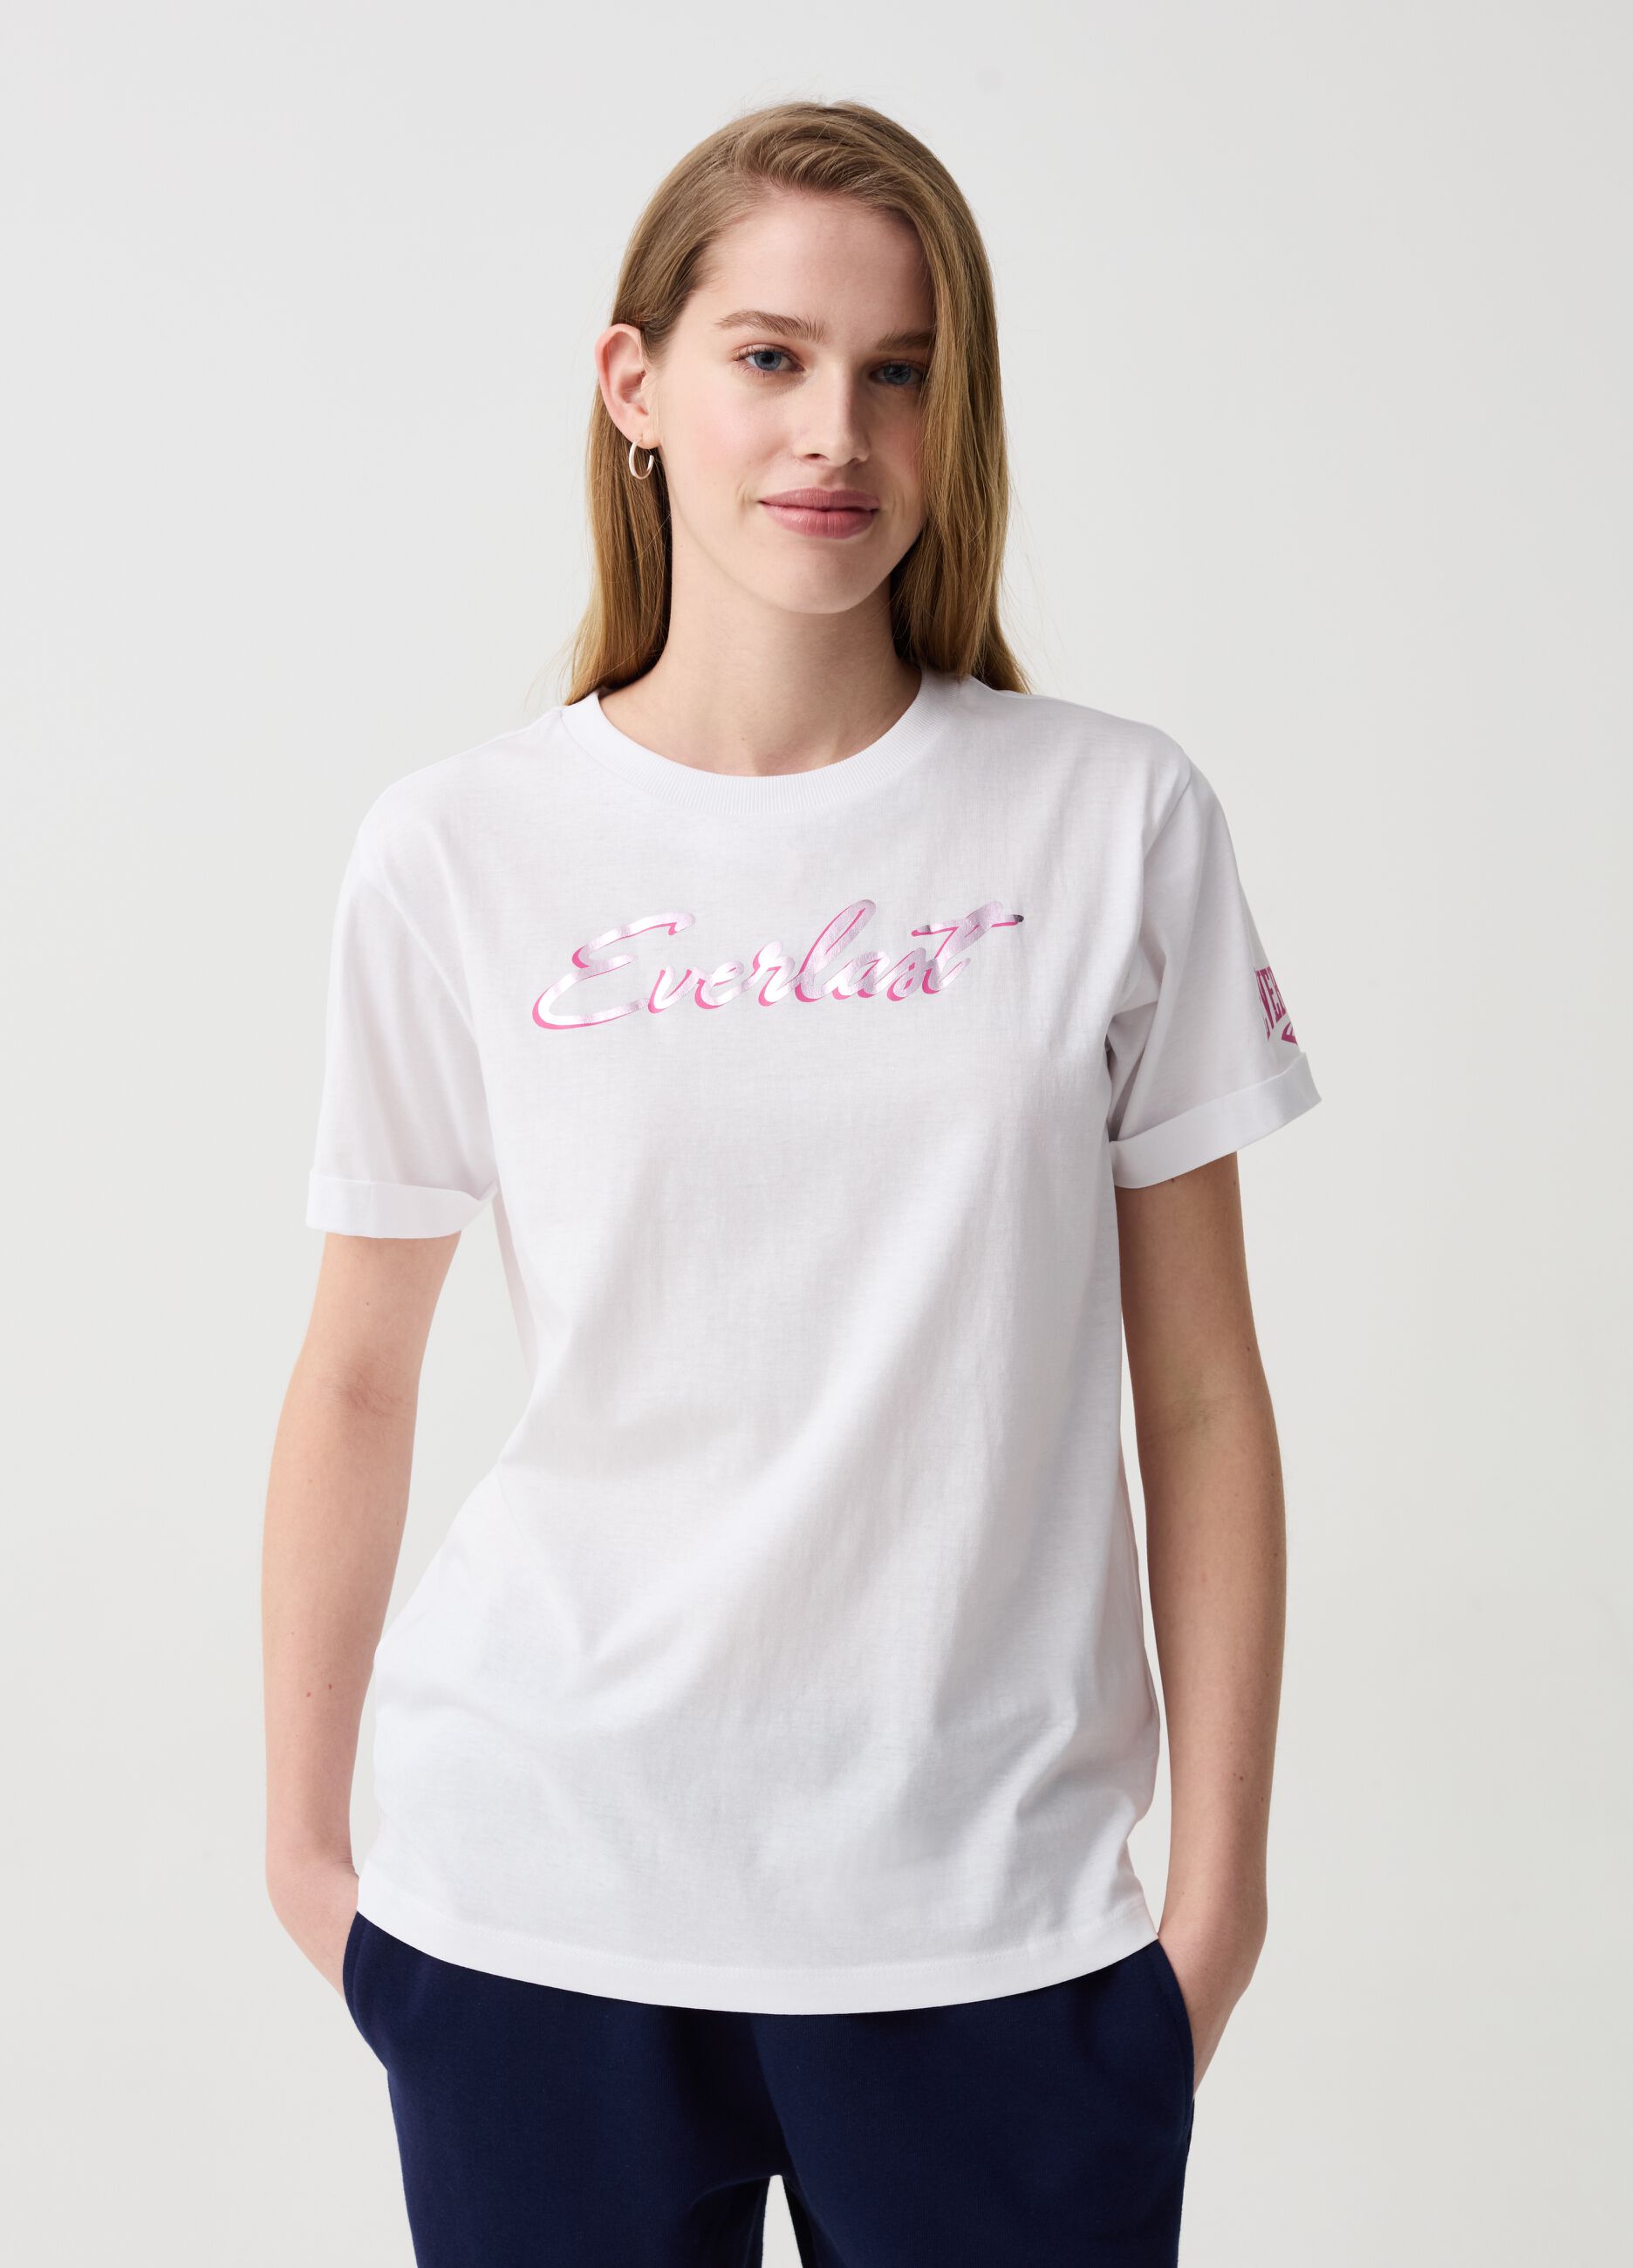 T-shirt con stampa logo in foil